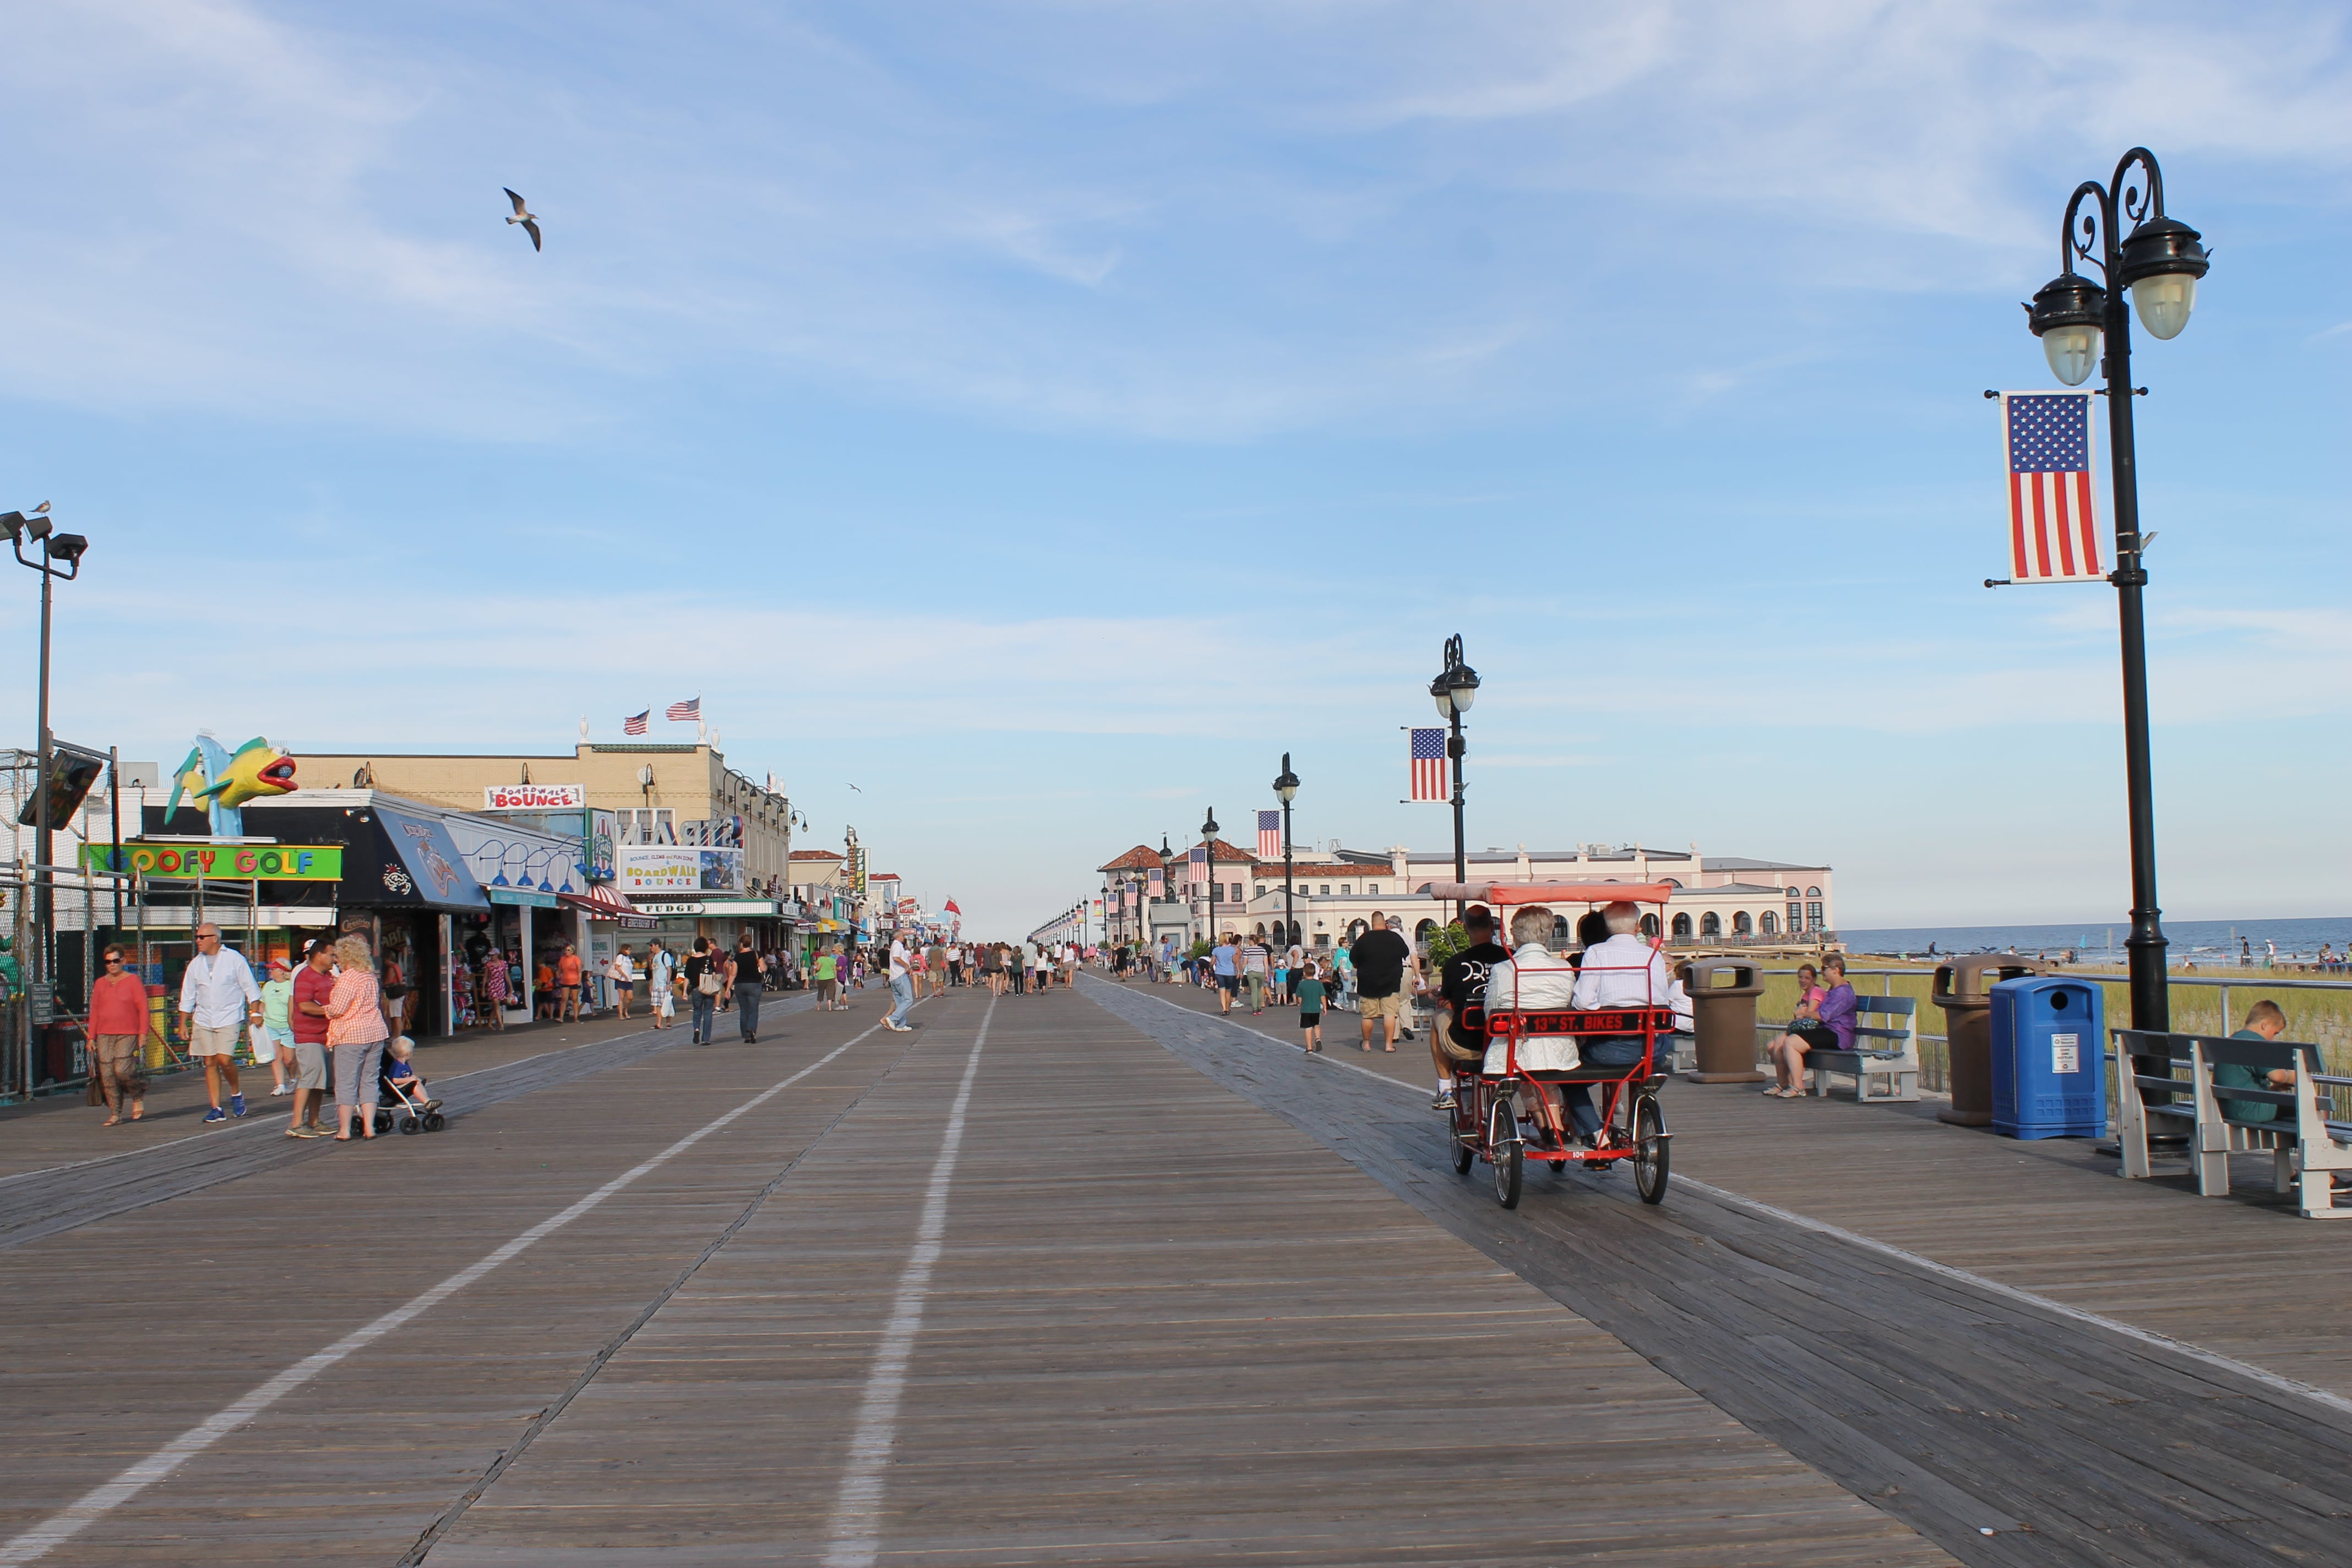 TOP 5 THINGS TO DO IN OCEAN CITY, NEW JERSEY - Pirate Voyages - Ocean City,  NJPirate Voyages – Ocean City, NJ